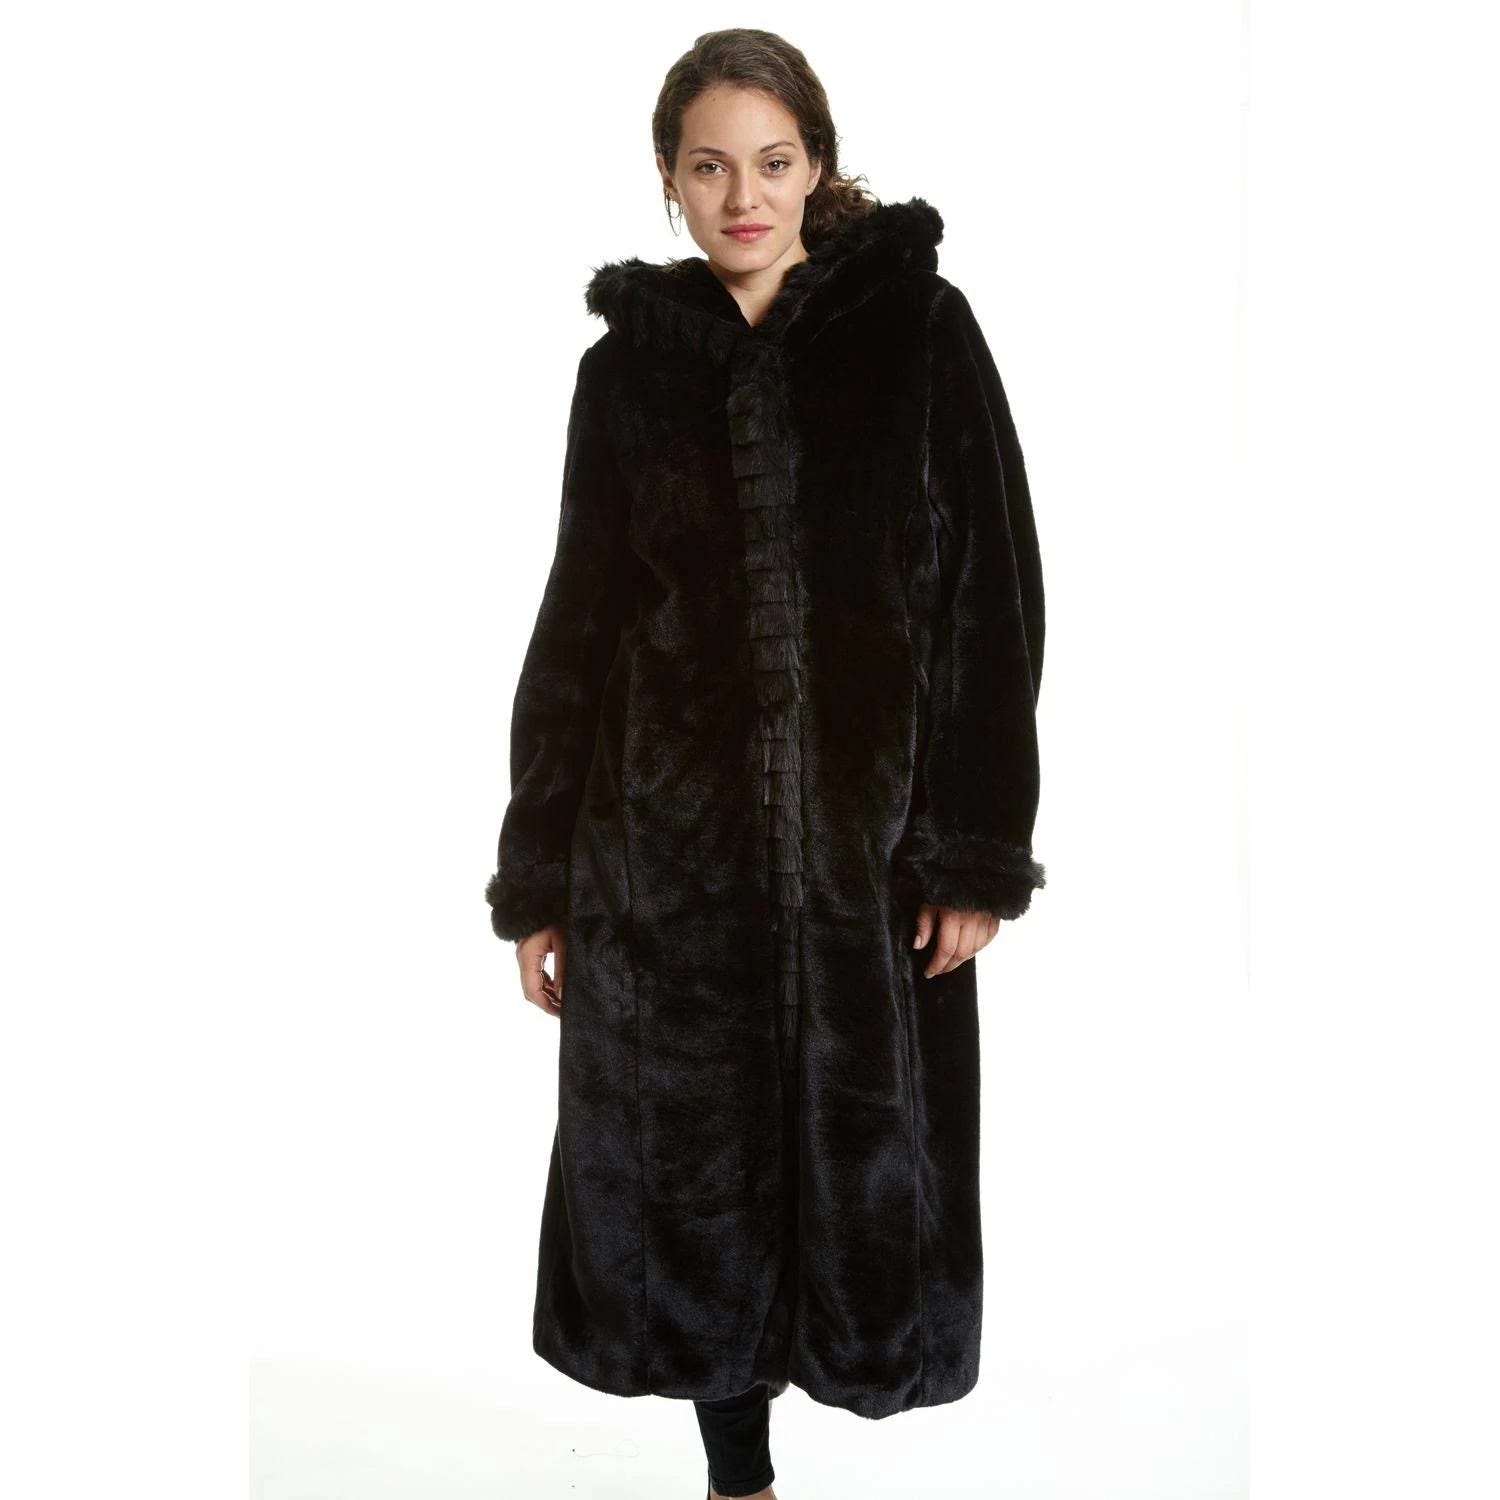 Chic Women's Full Length Faux Fur Coat with Hood | Image